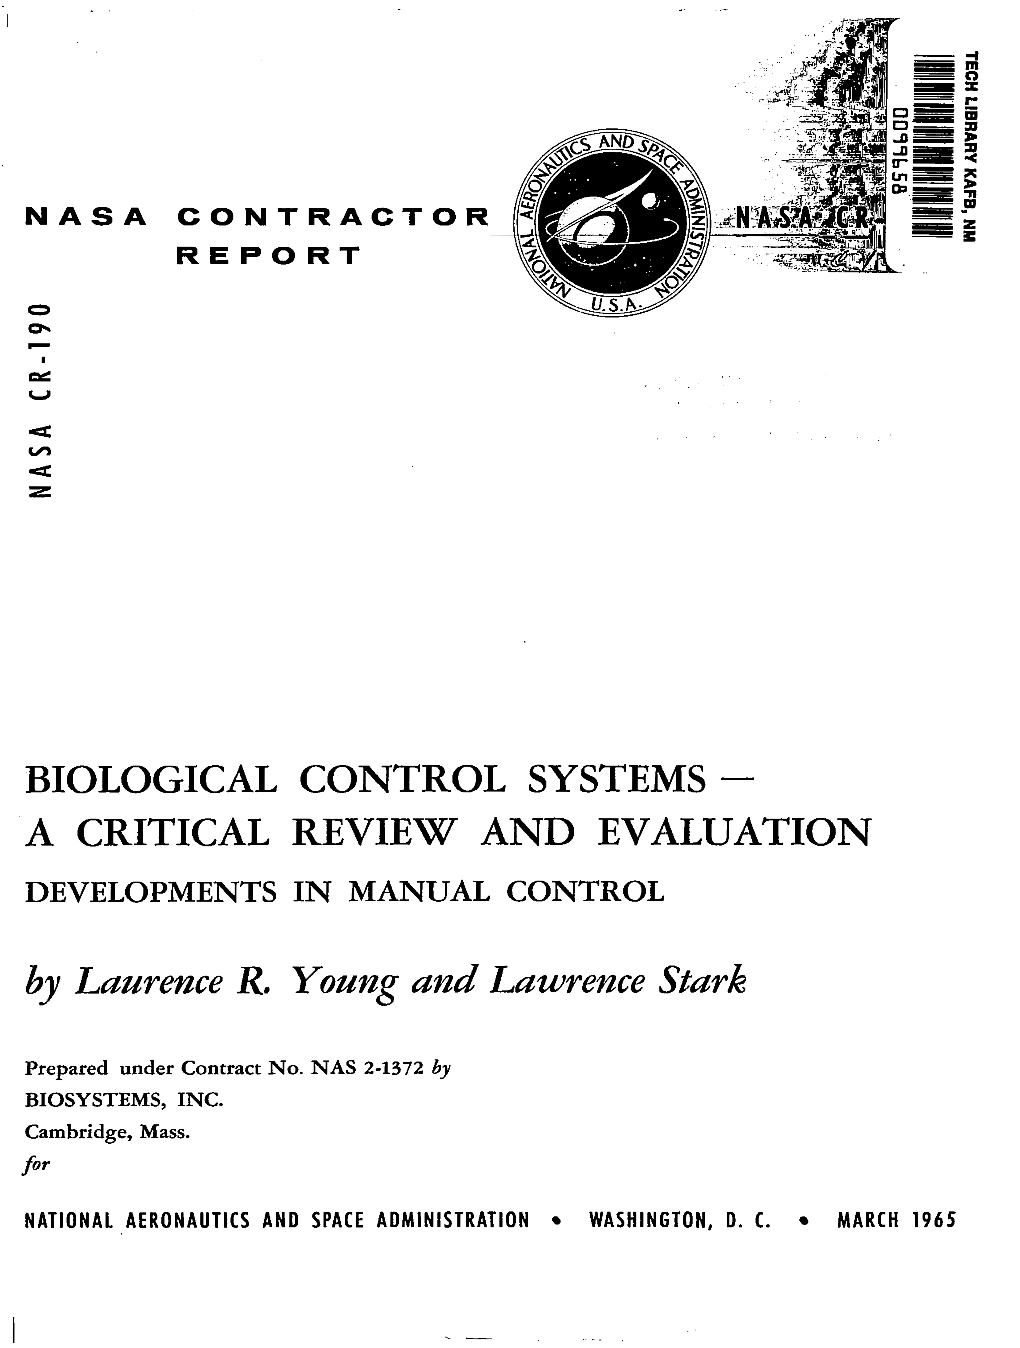 Biological Control Systems - a Criticalreview and Evaluation Developments in Manualcontrol